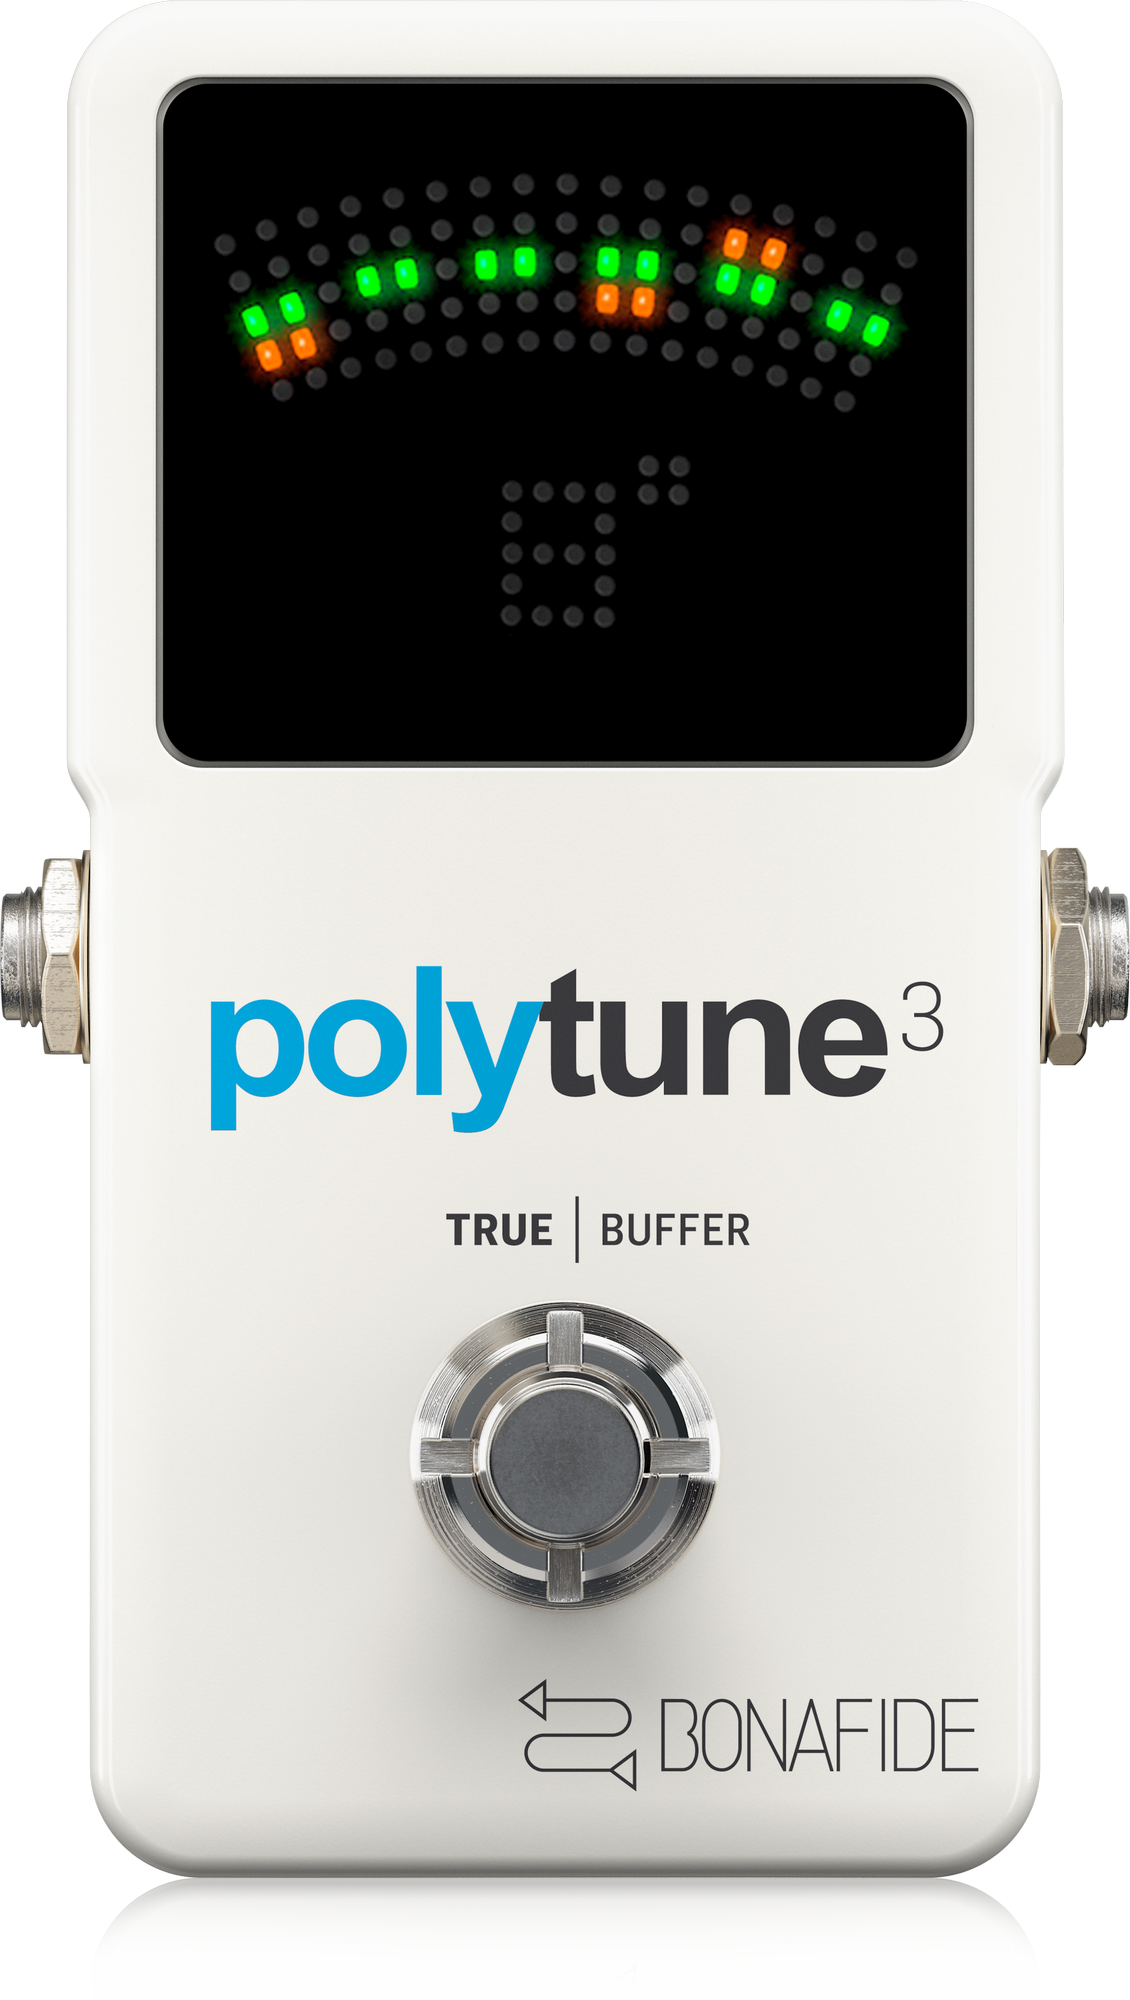 TC Electronic Polytune 3 Ultra-compact Polyphonic Tuner With Multiple Tuning Modes And Built-in Bonafide Buffer, TC ELECTRONIC, TUNER & METRONOME, tc-electronic-tuner-metronome-tc-polytune-3, ZOSO MUSIC SDN BHD